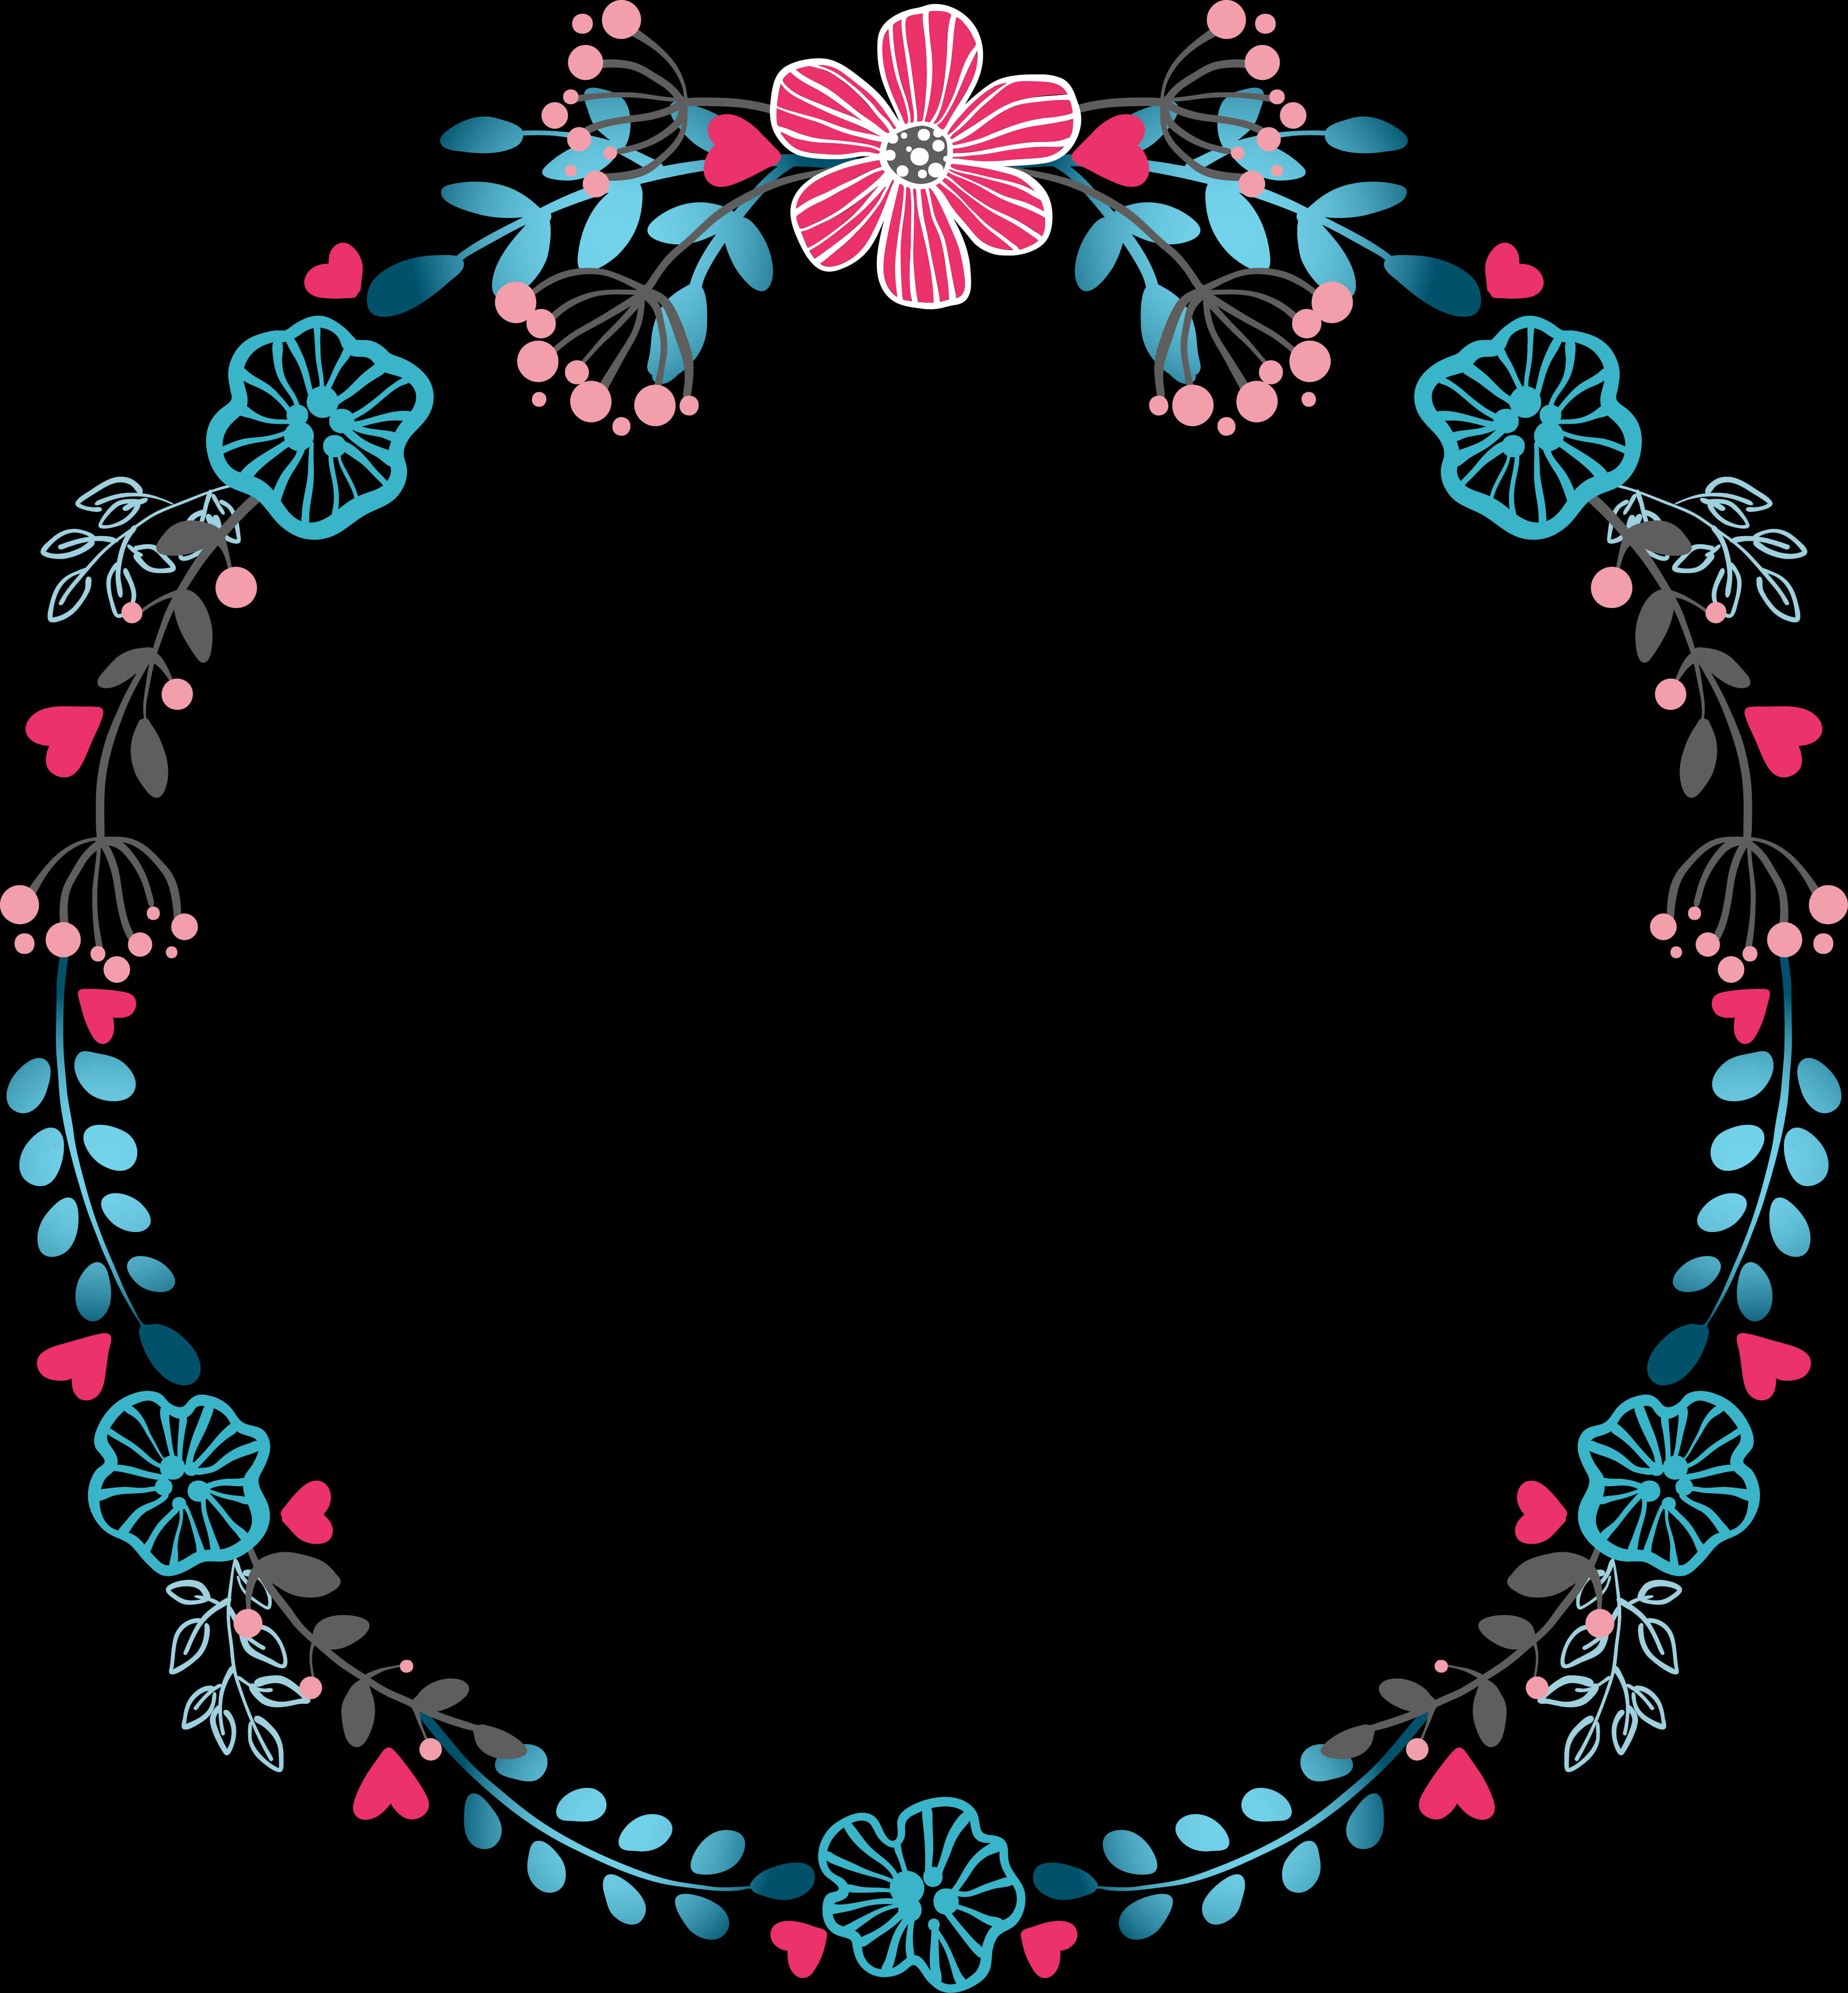 A Circular Floral Frame With Pink And Blue Flowers